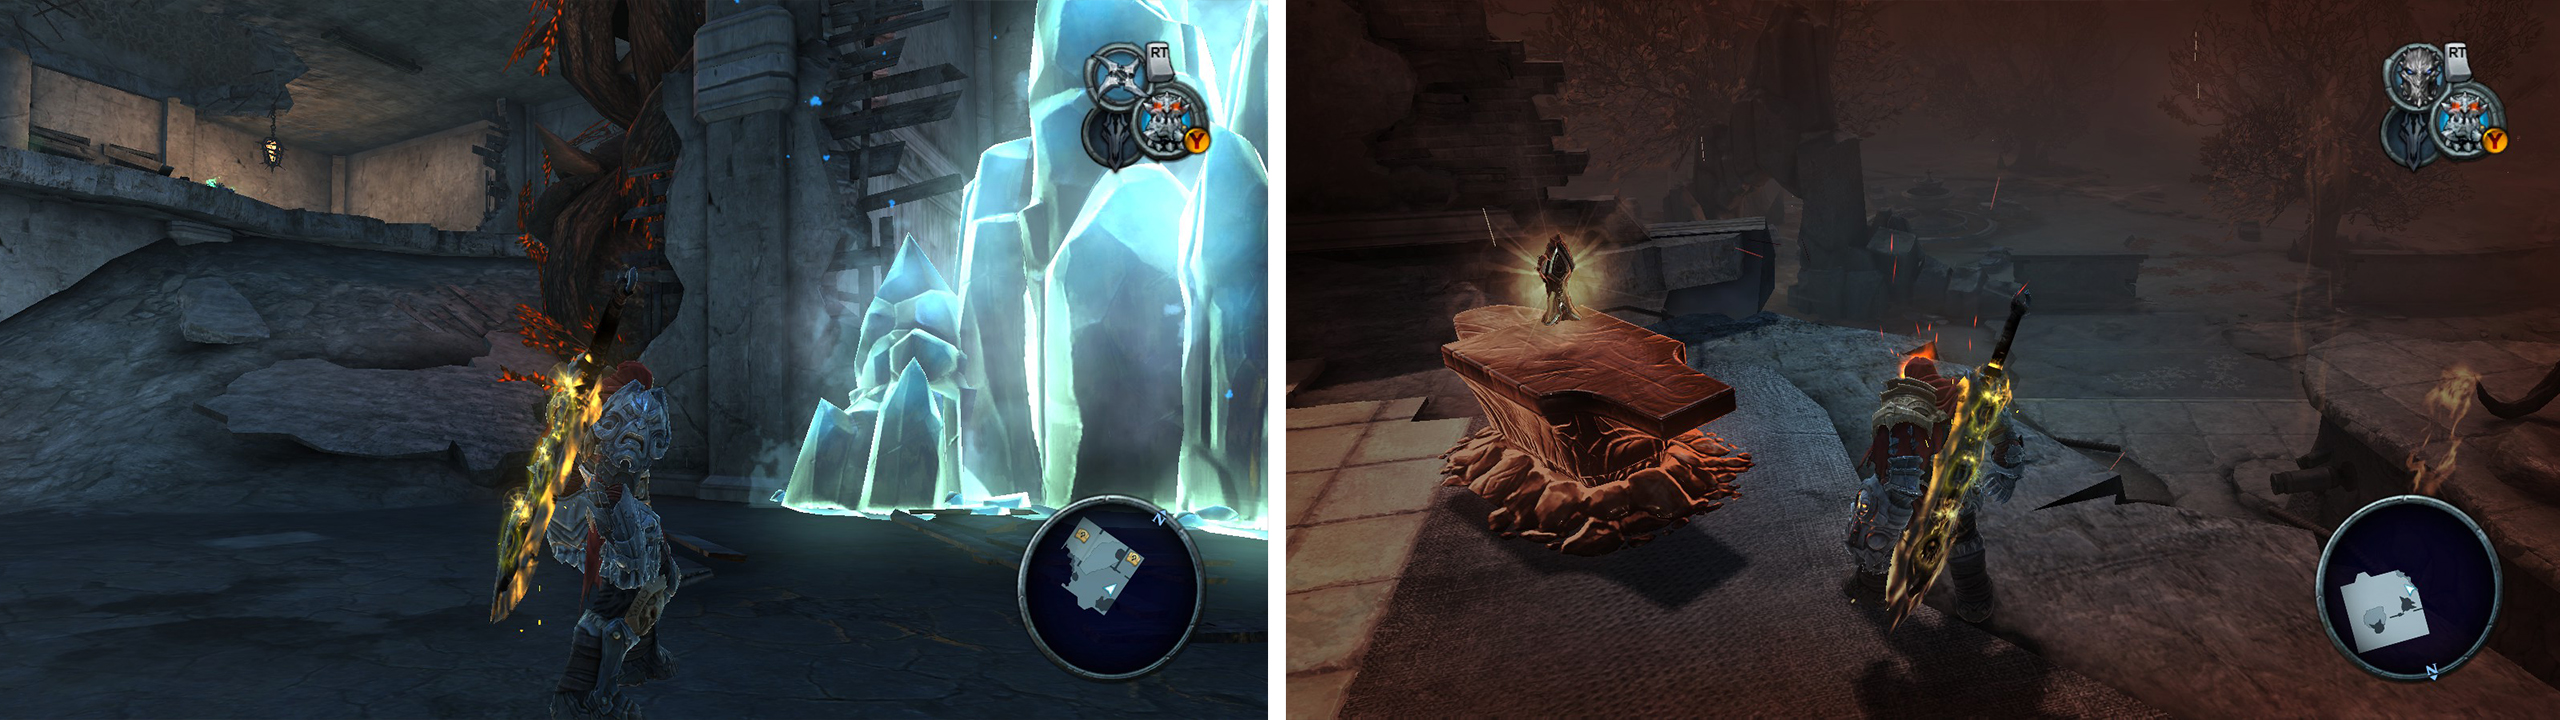 Destroy the blue crystals on the second floor (left) for a Life Stone Shard. Climb to the top of the building to find the next Armageddon Blade Shard (right).